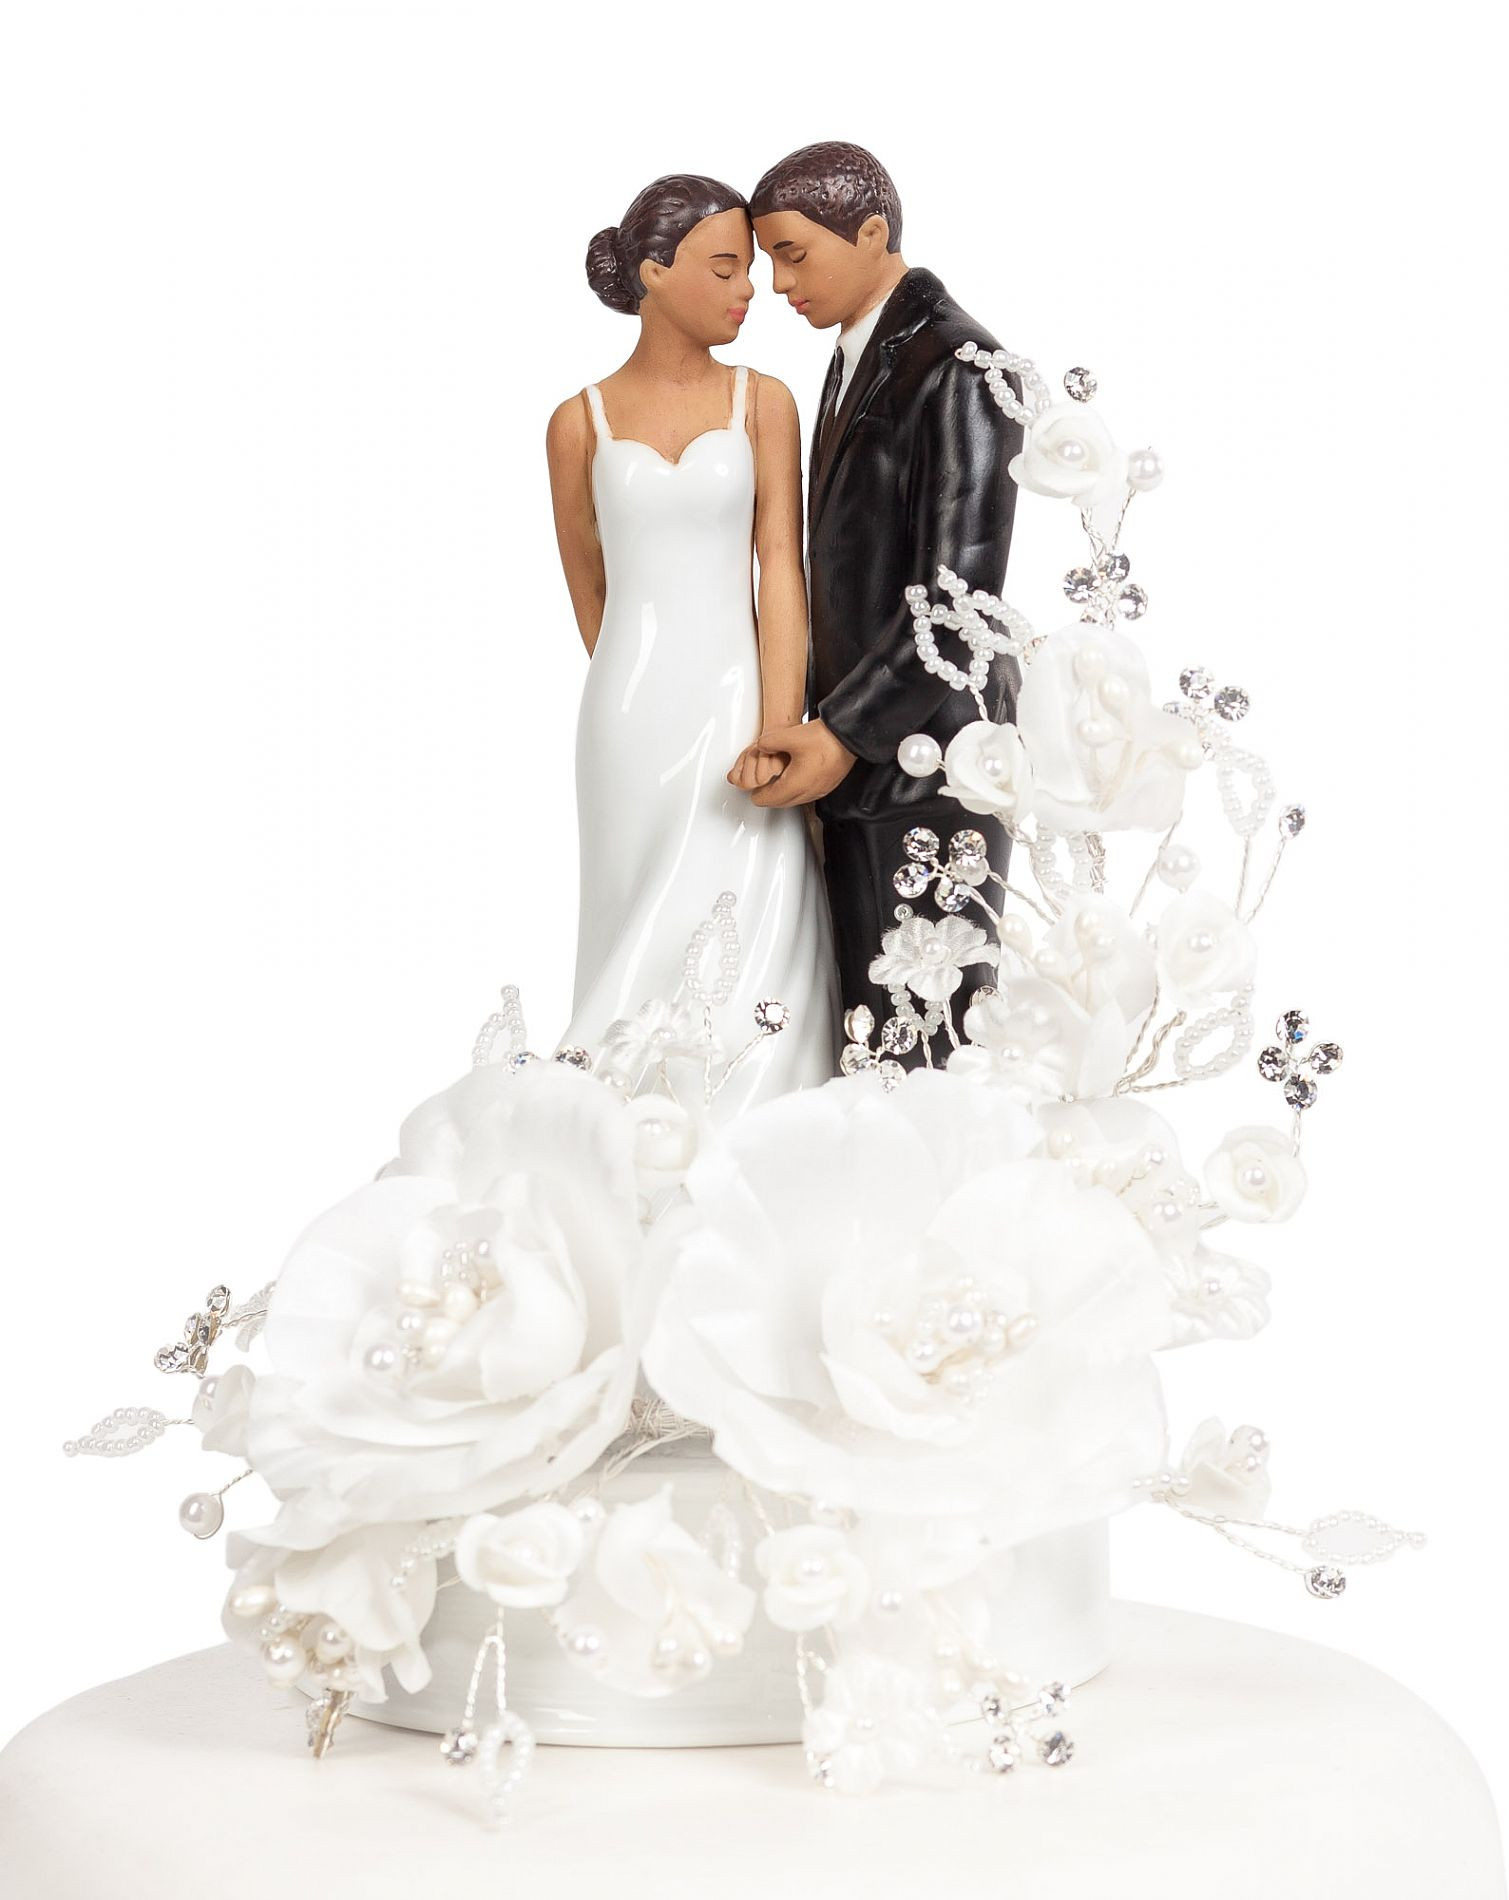 African American Cake Toppers For Wedding Cakes
 Vintage African American Cake Topper